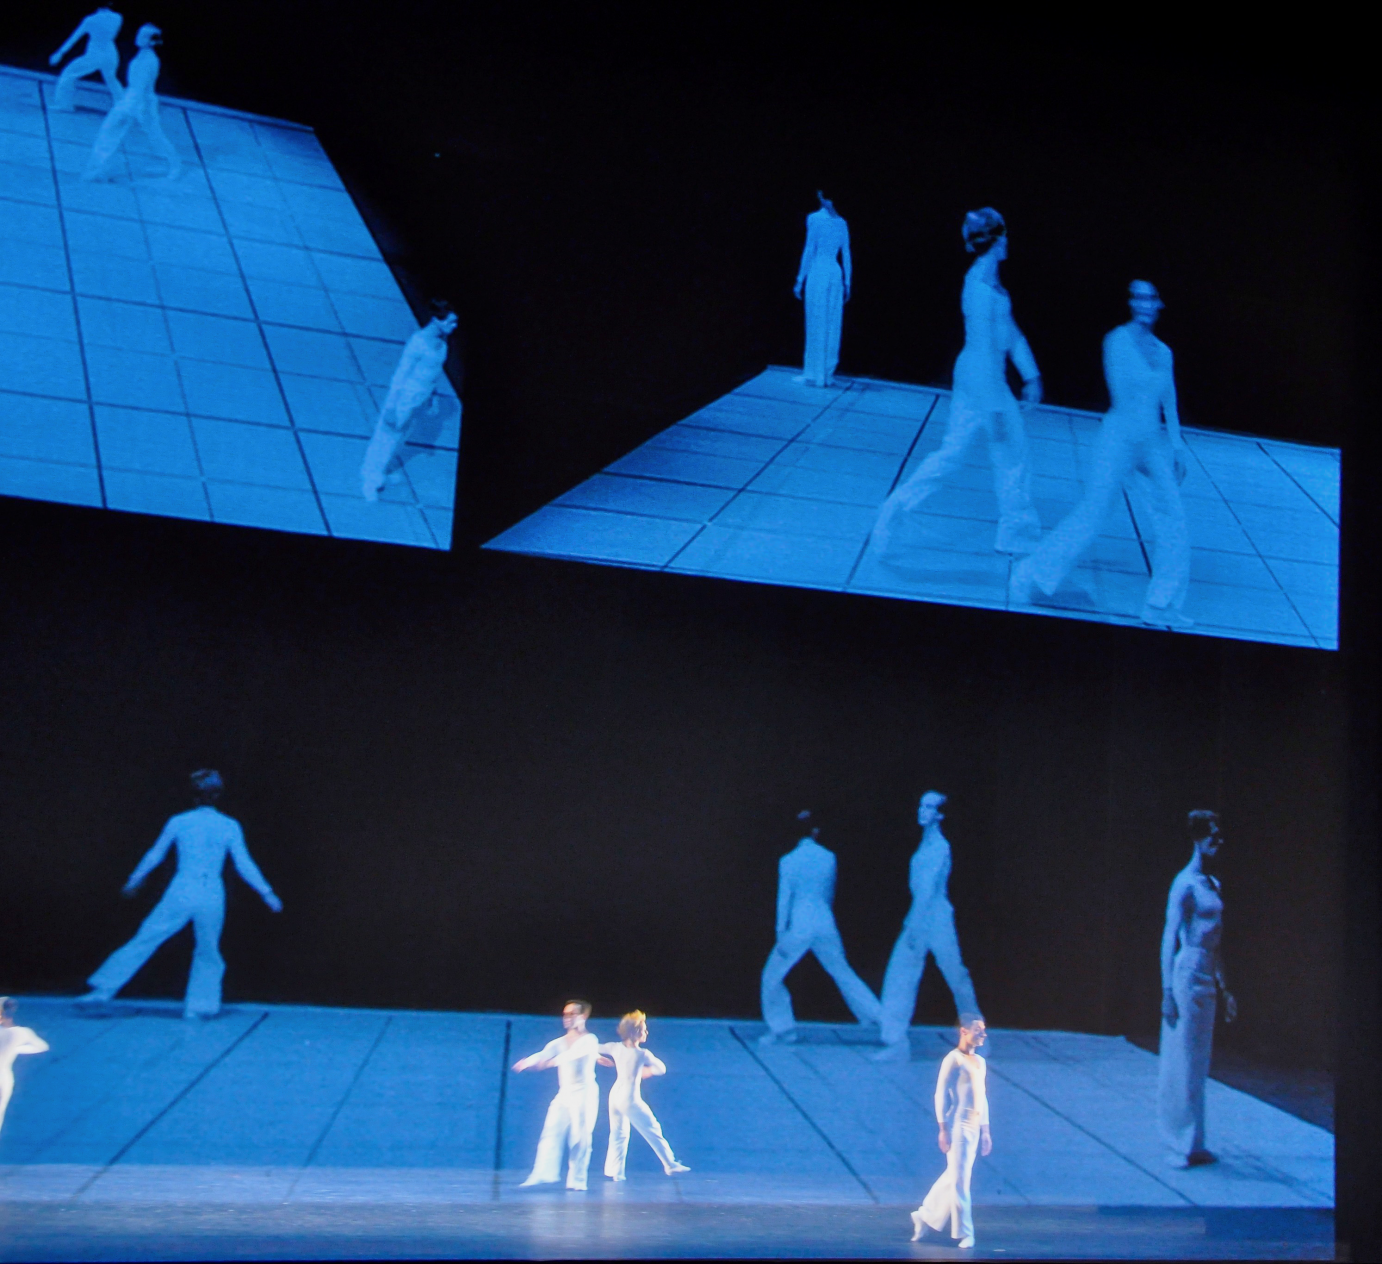 The film is split into two panels. In front and on stage, four dancers walk.